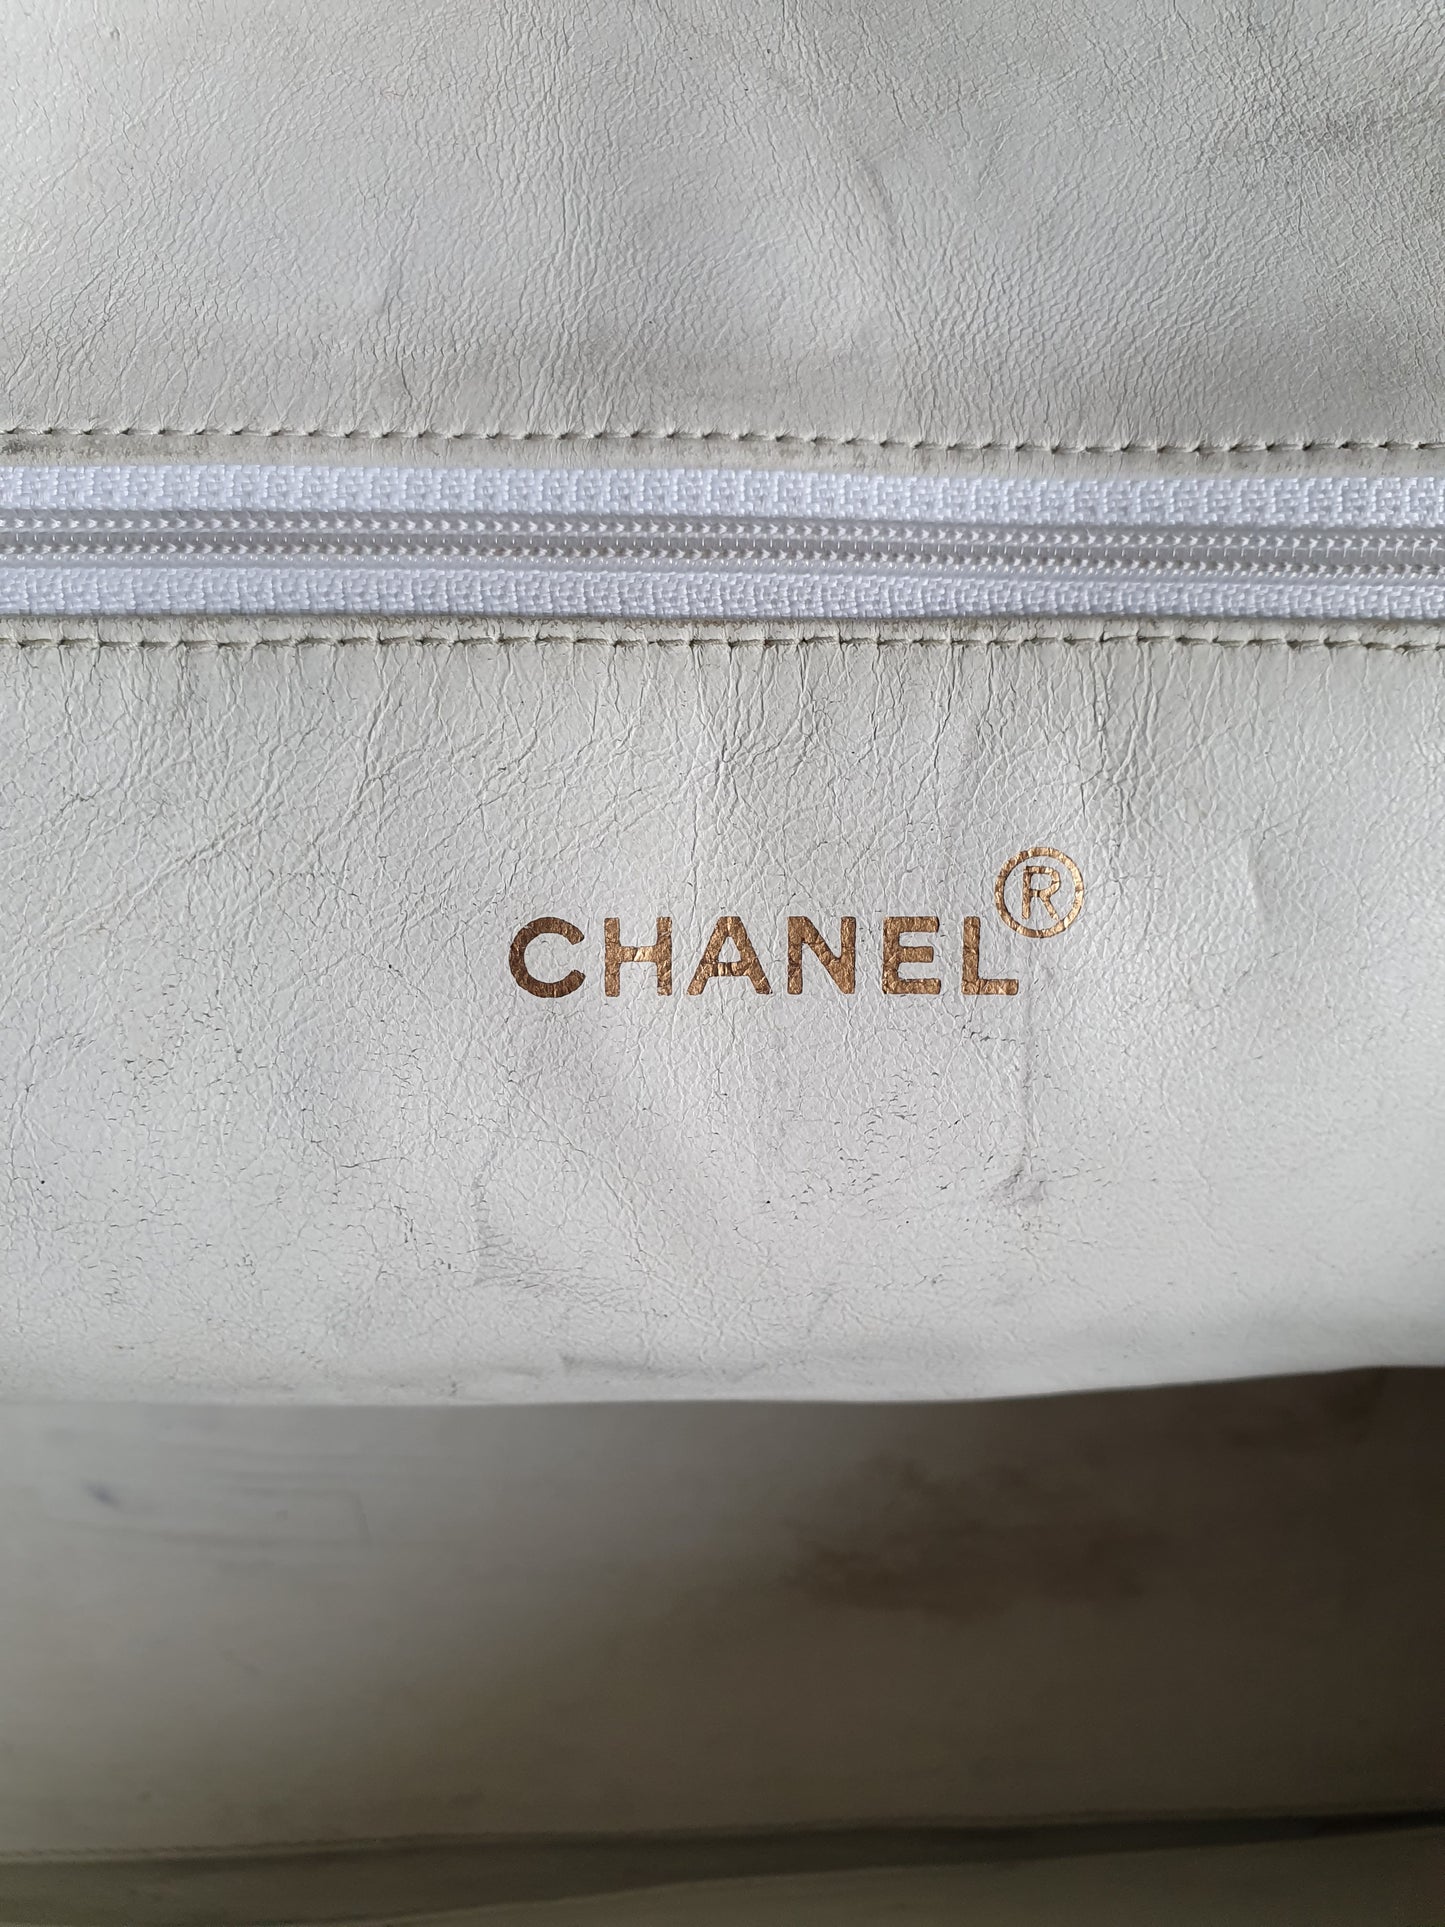 Chanel vintage shopping tote